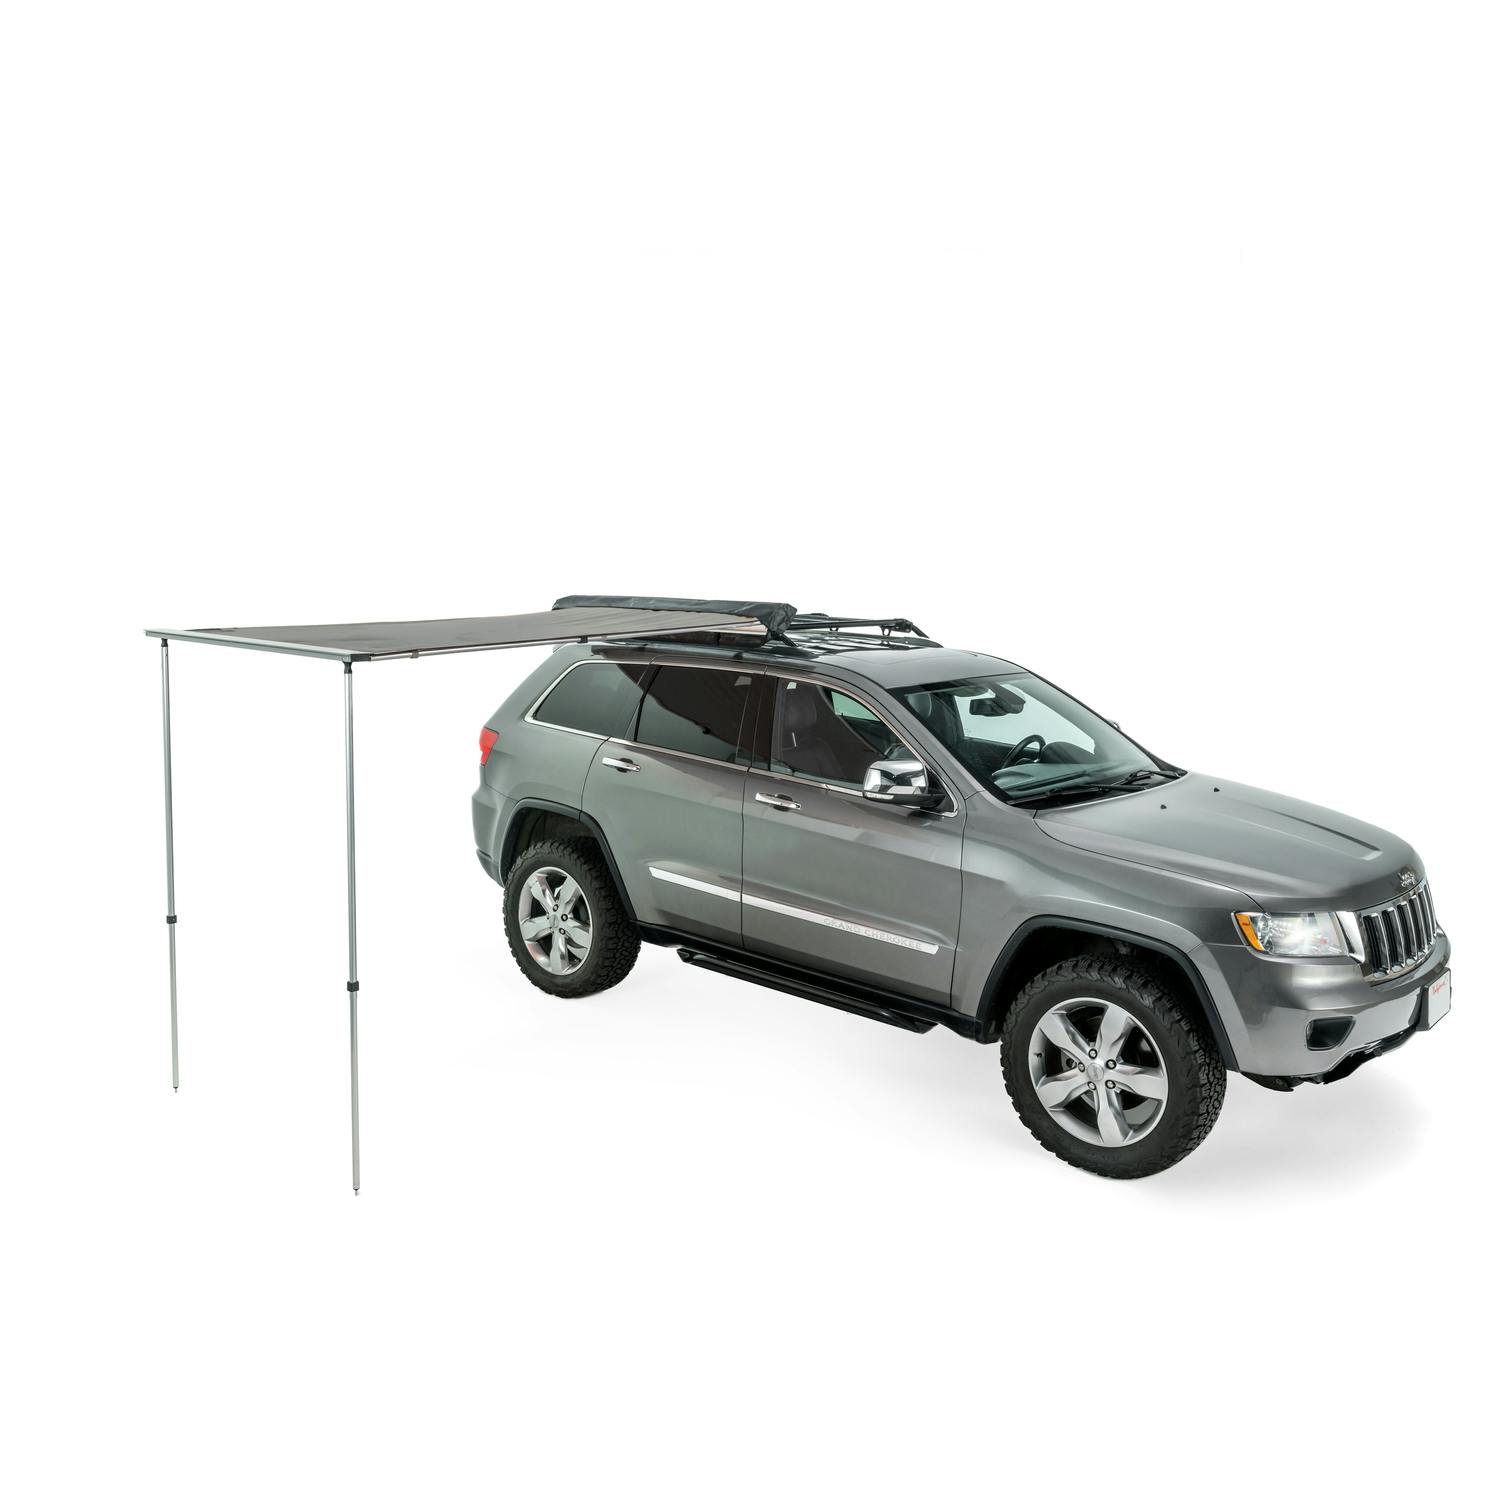 Thule OverCast Awning open on roof of SUV